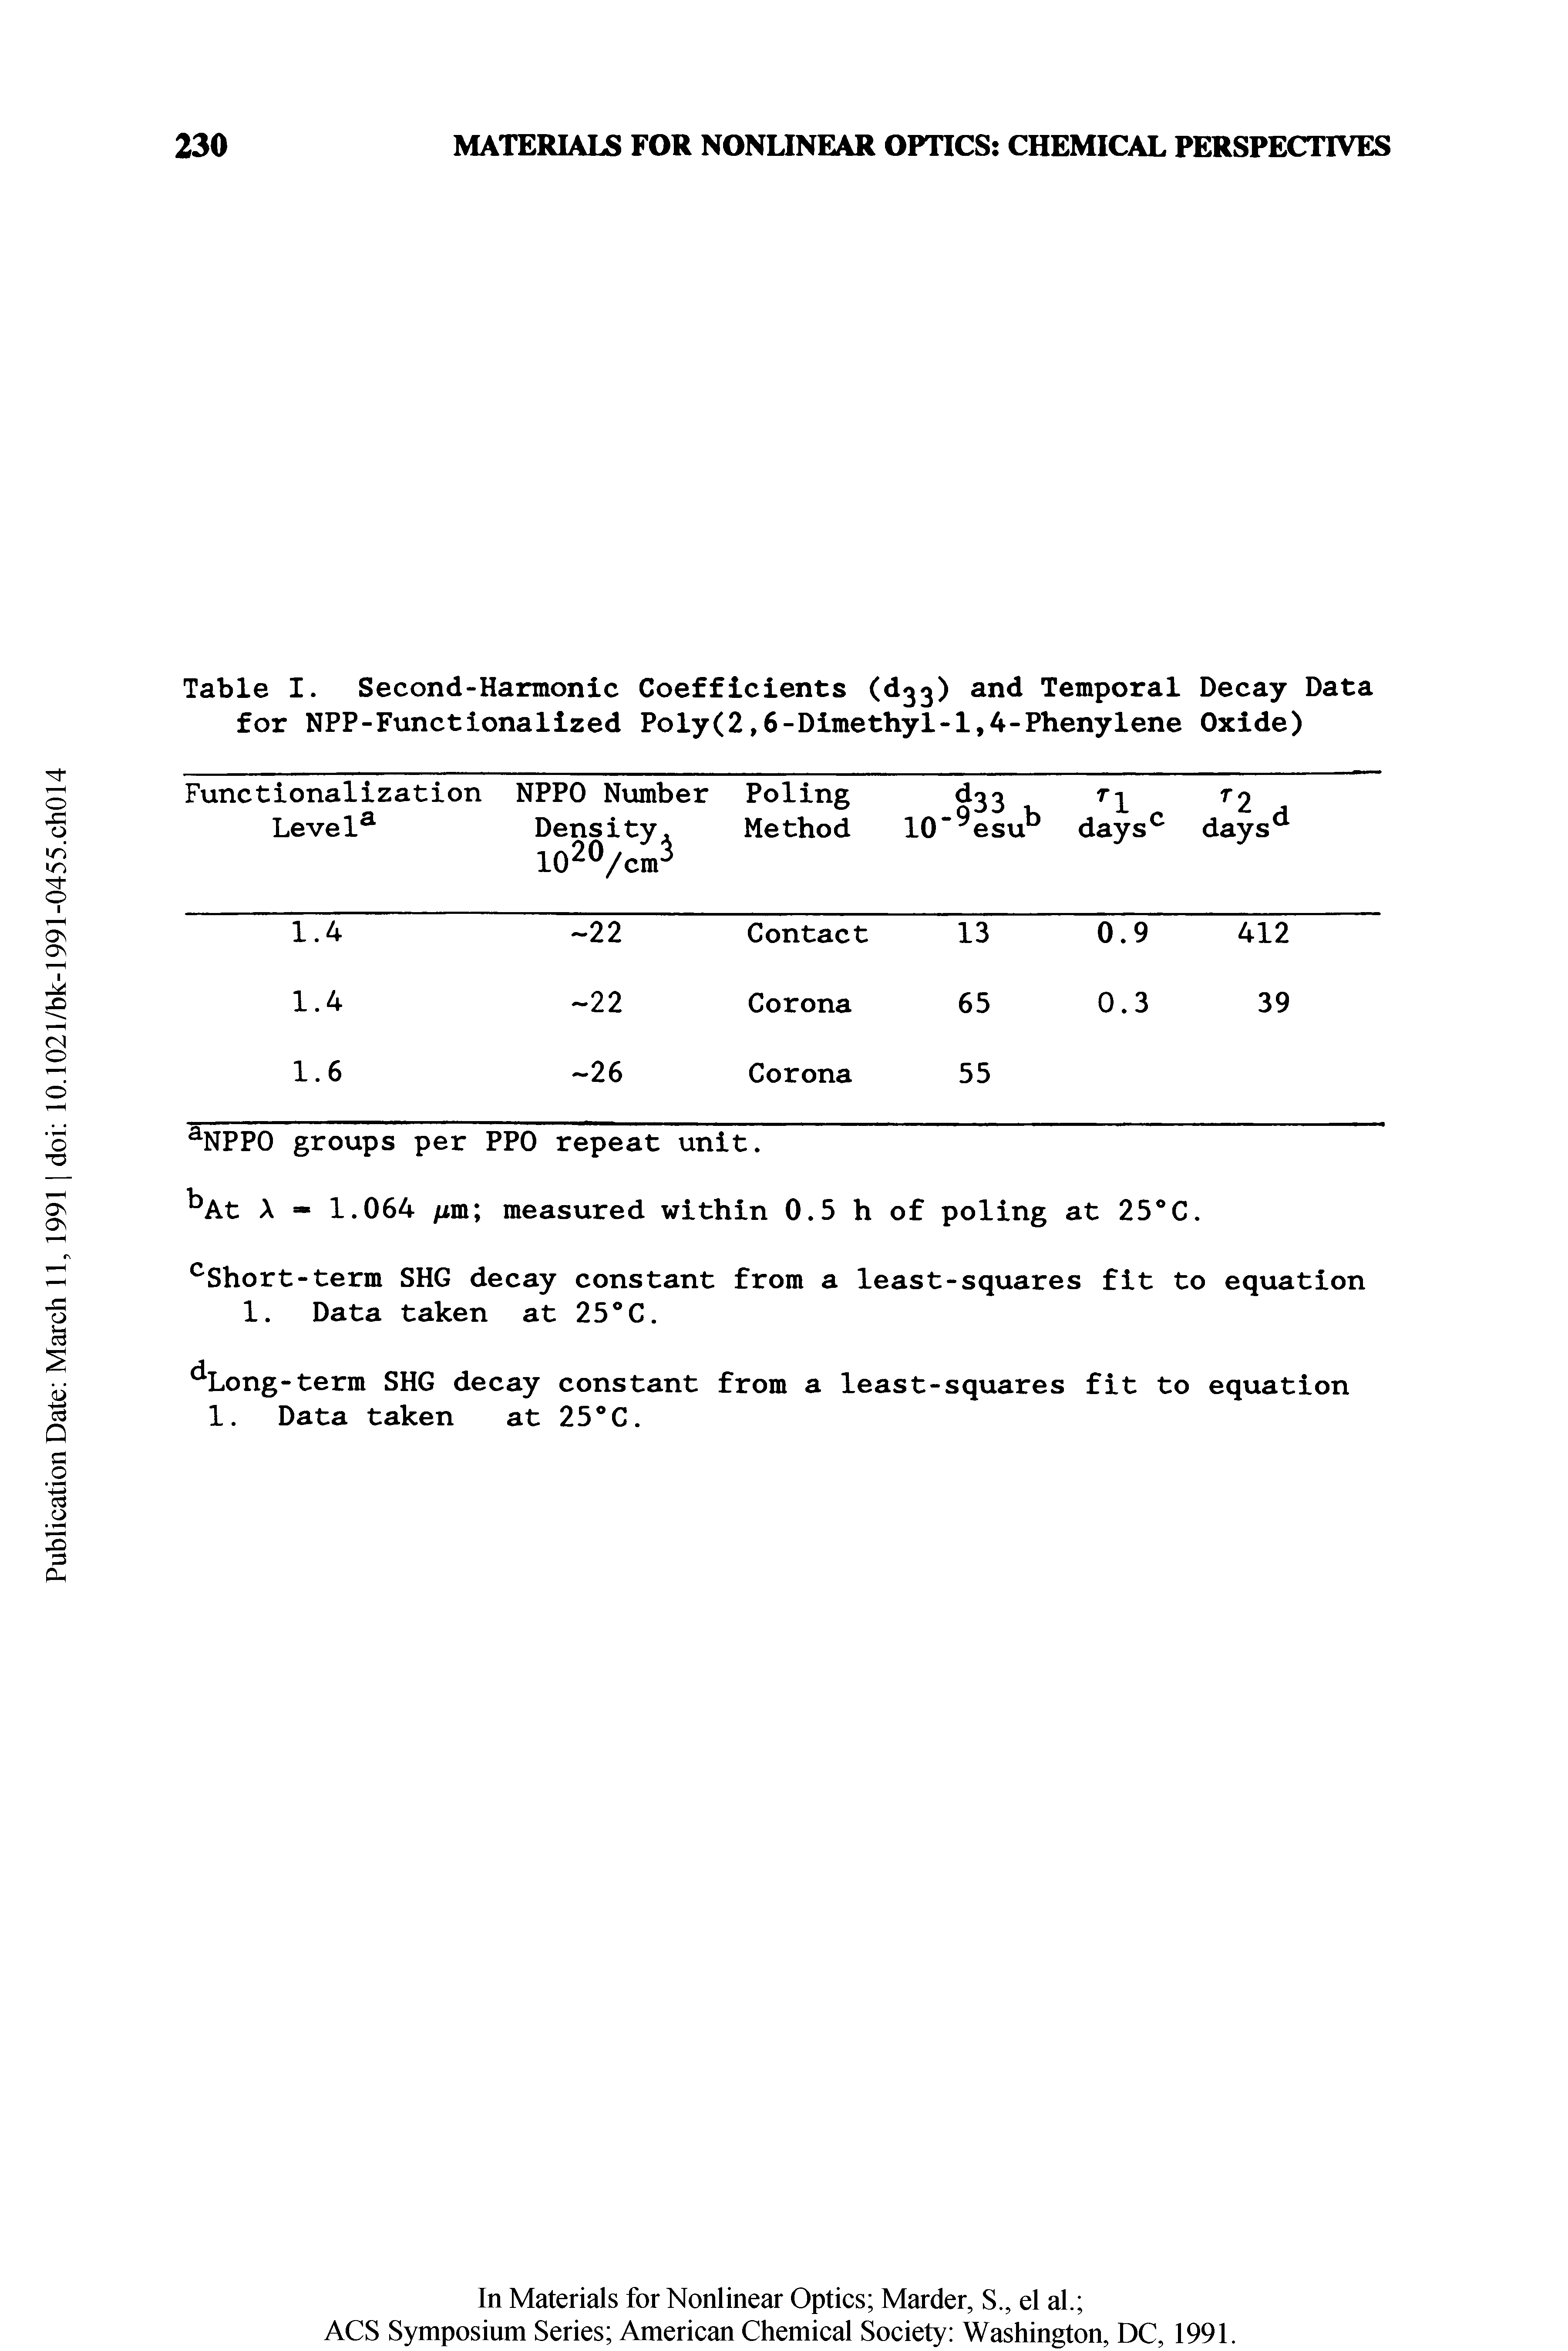 Table I. Second-Harmonic Coefficients 33) and Temporal Decay Data for NPP-Functionalized Poly(2,6-Dimethyl-1,4-Phenylene Oxide)...